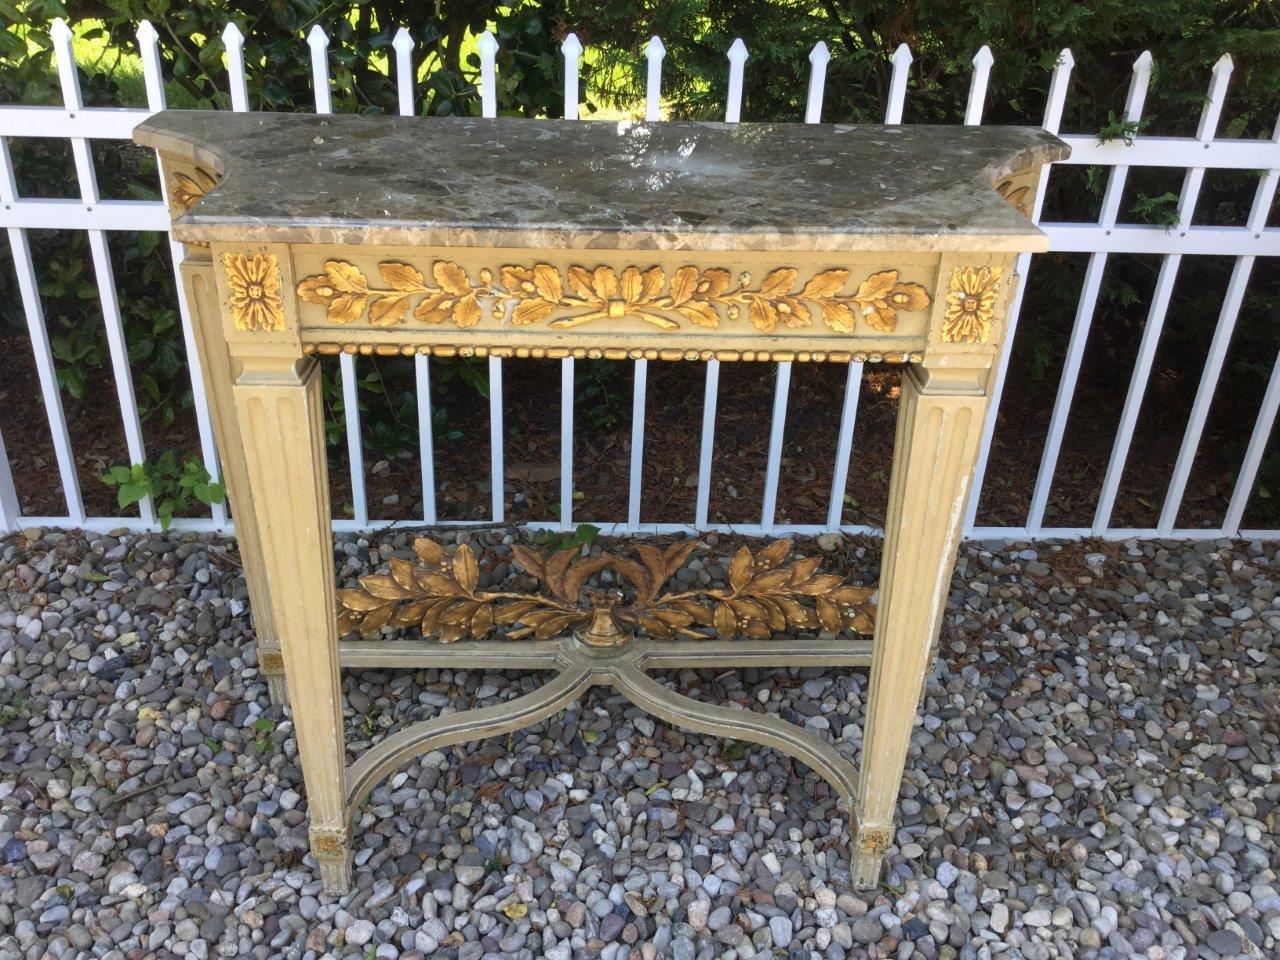 Gorgeous Louis XVI style console having a grey and white marble top over painted base enhanced with gold acanthus leaves on all three sides. There is a cross stretcher at the bottom also adorned with gold acanthus leaves. The sides of the console